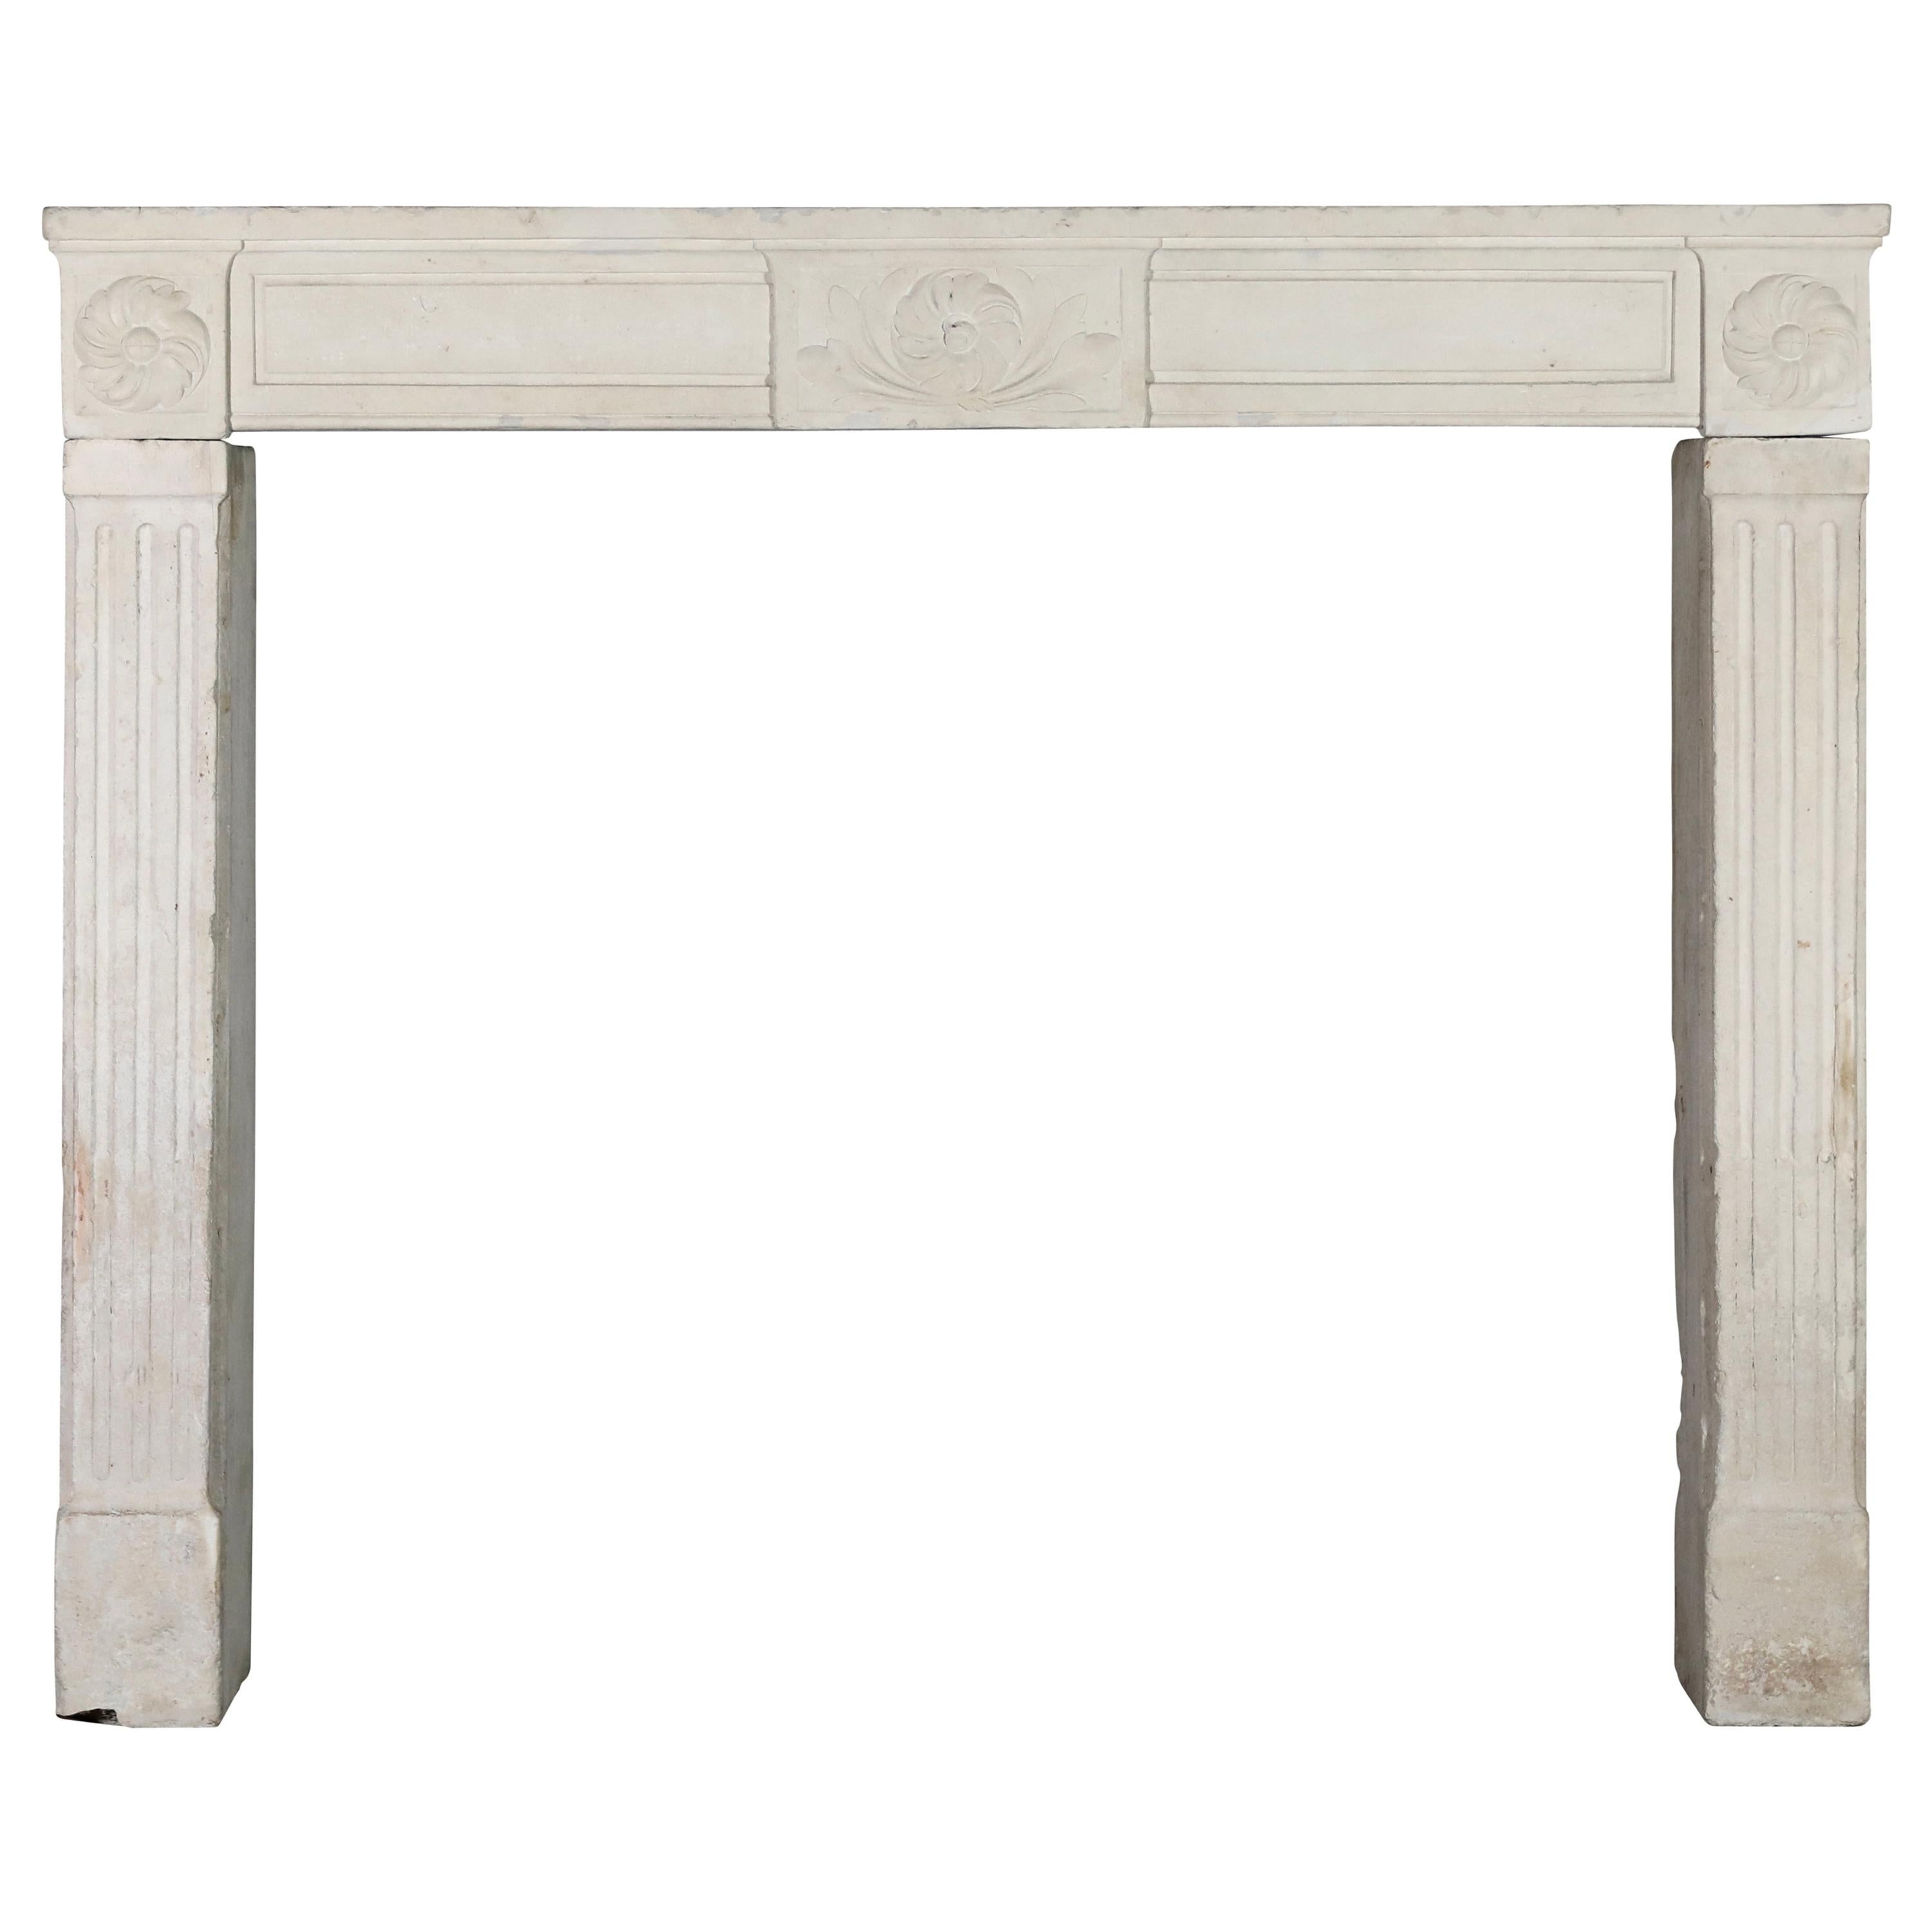 Vintage Classy White Fireplace Surround in Limestone For Sale